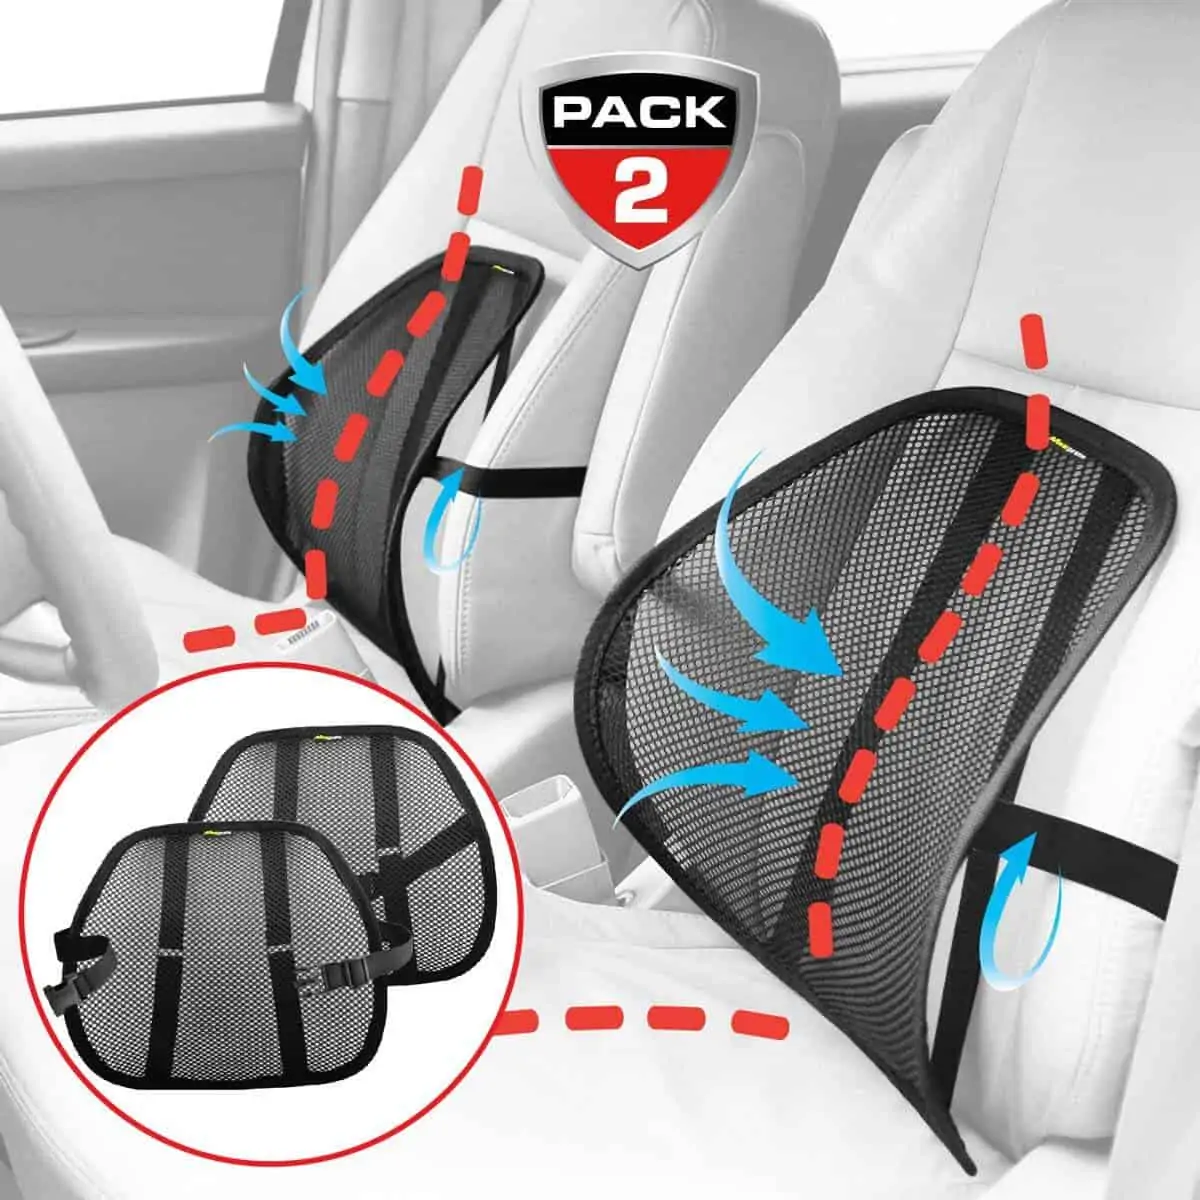 Back Support for Drivers